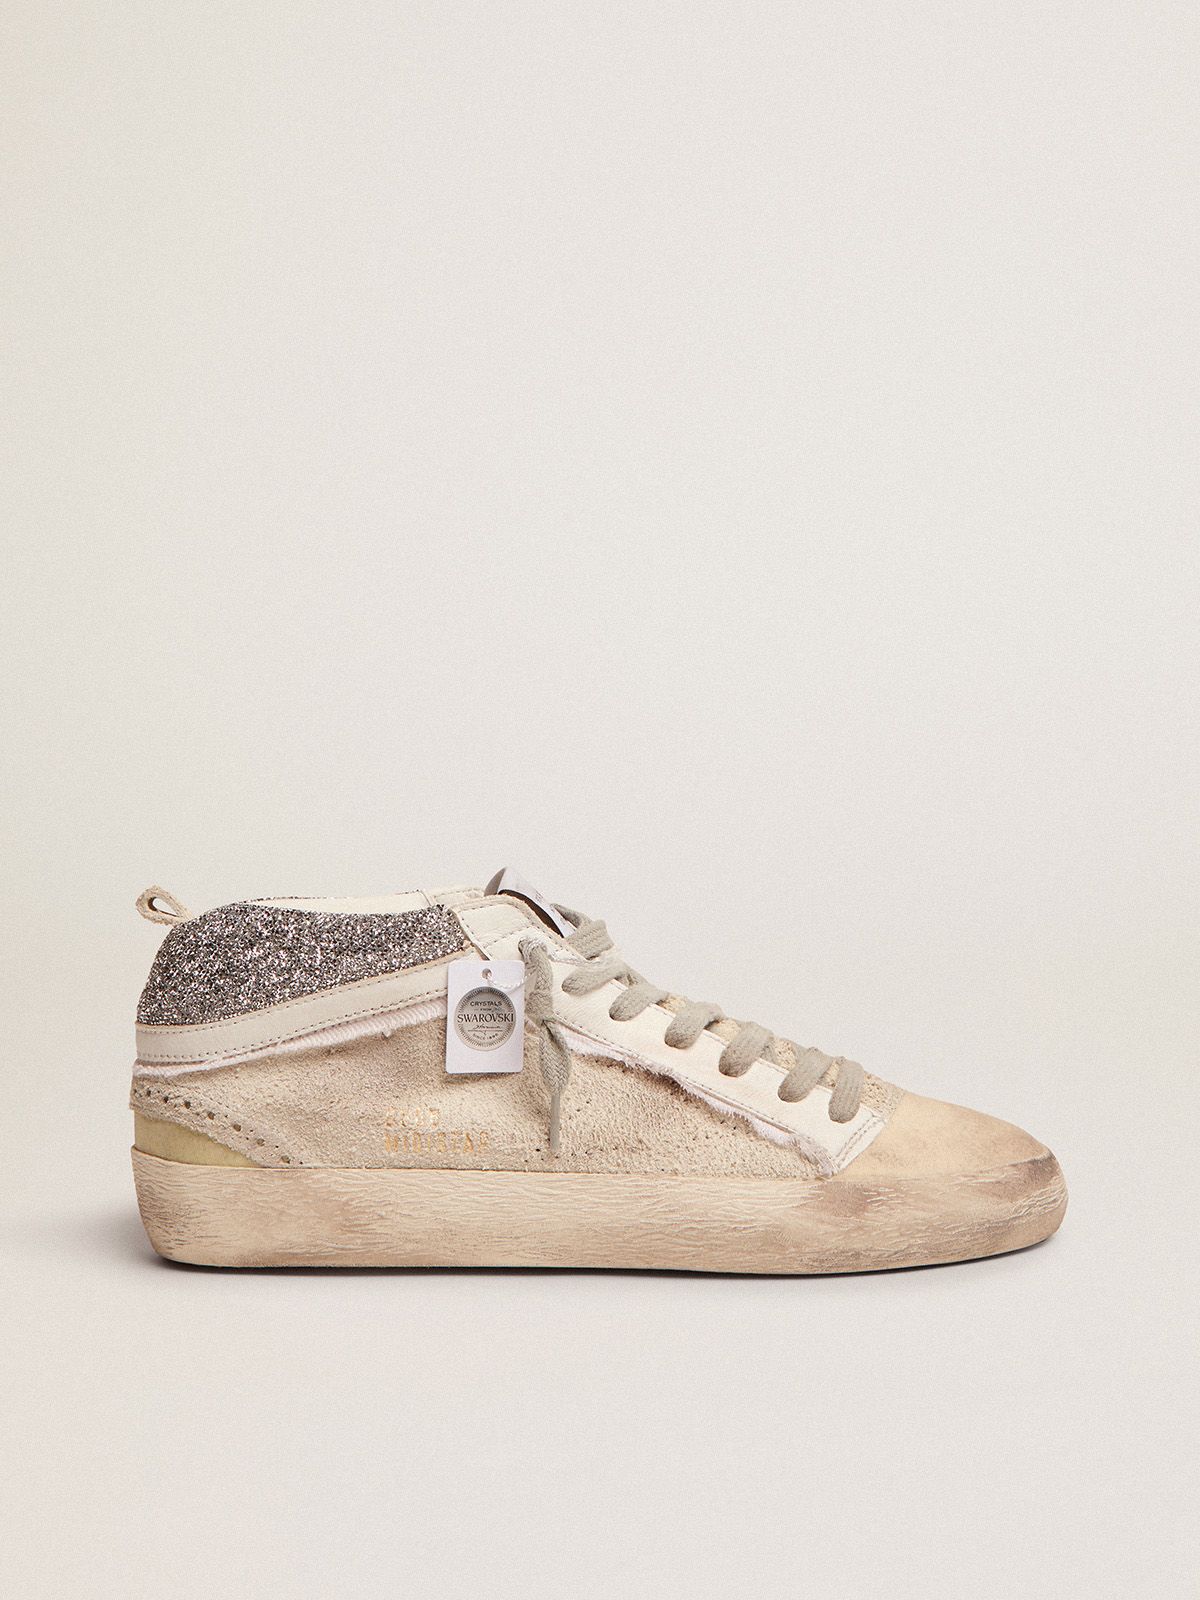 Golden Goose Sneakers Uomo Mid Star sneakers with off-white reverse leather upper and Swarovski crystal heel tab